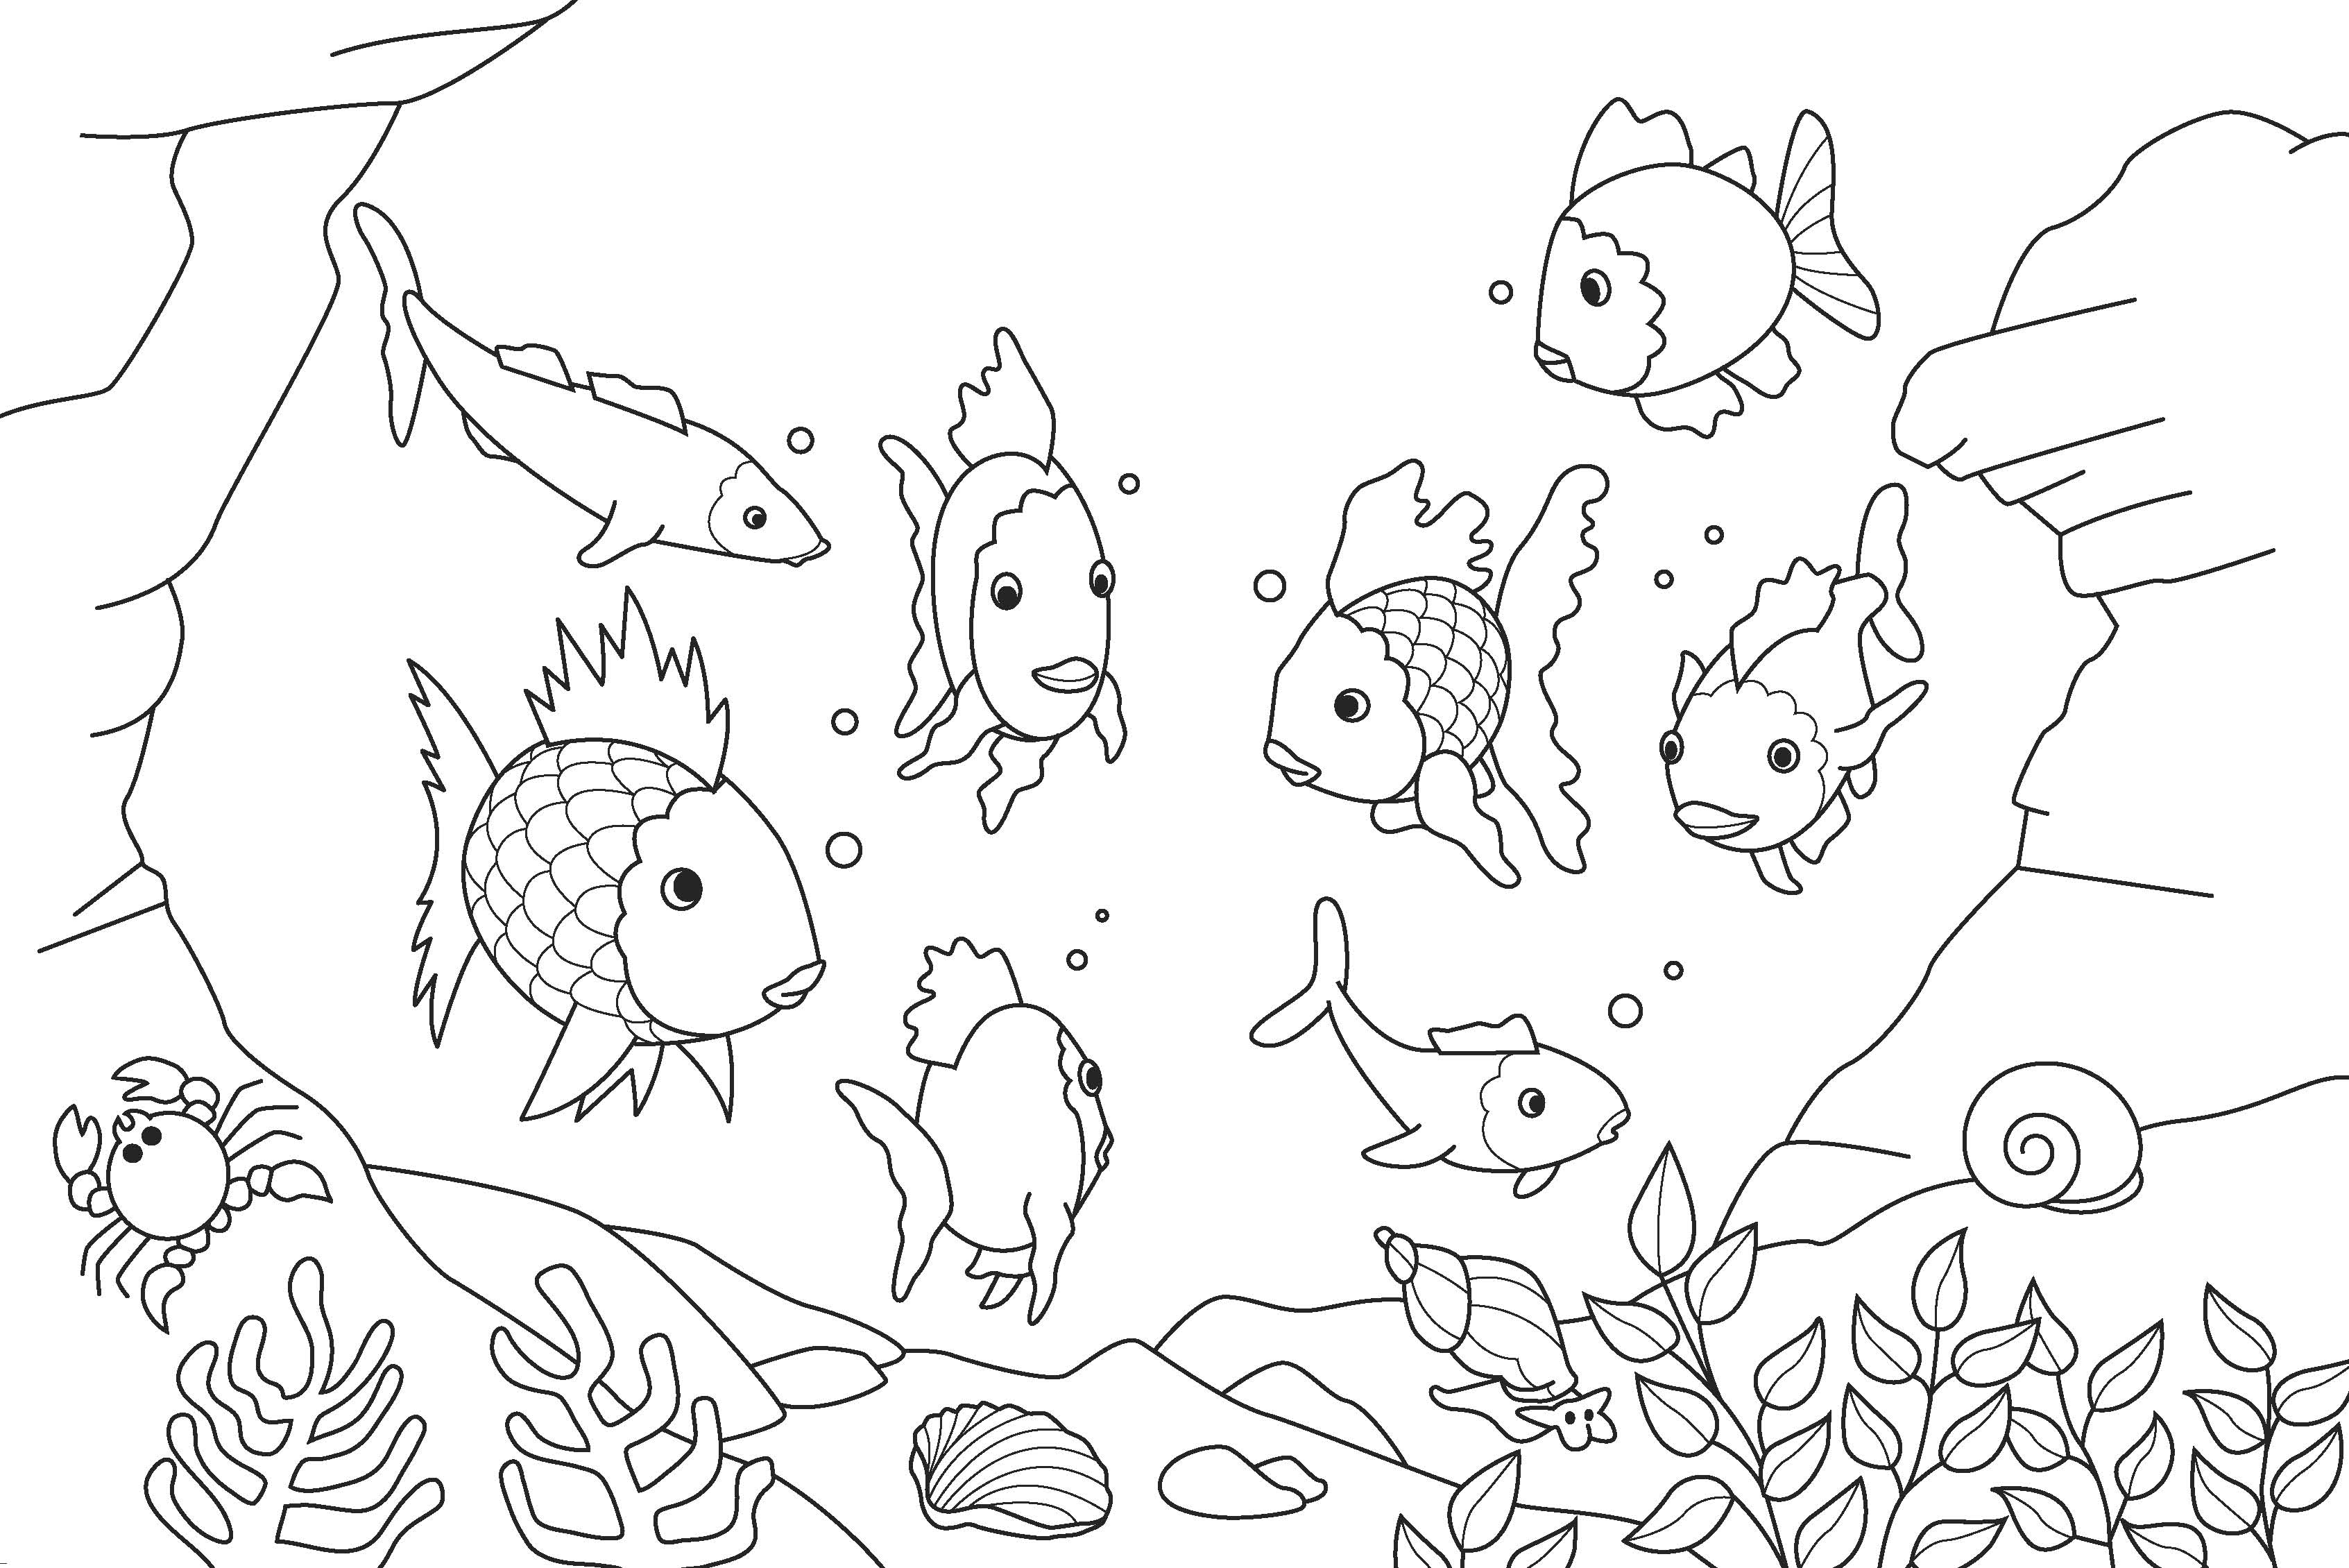 Two Fish Jumping Coloring Page - VoteForVerde.com